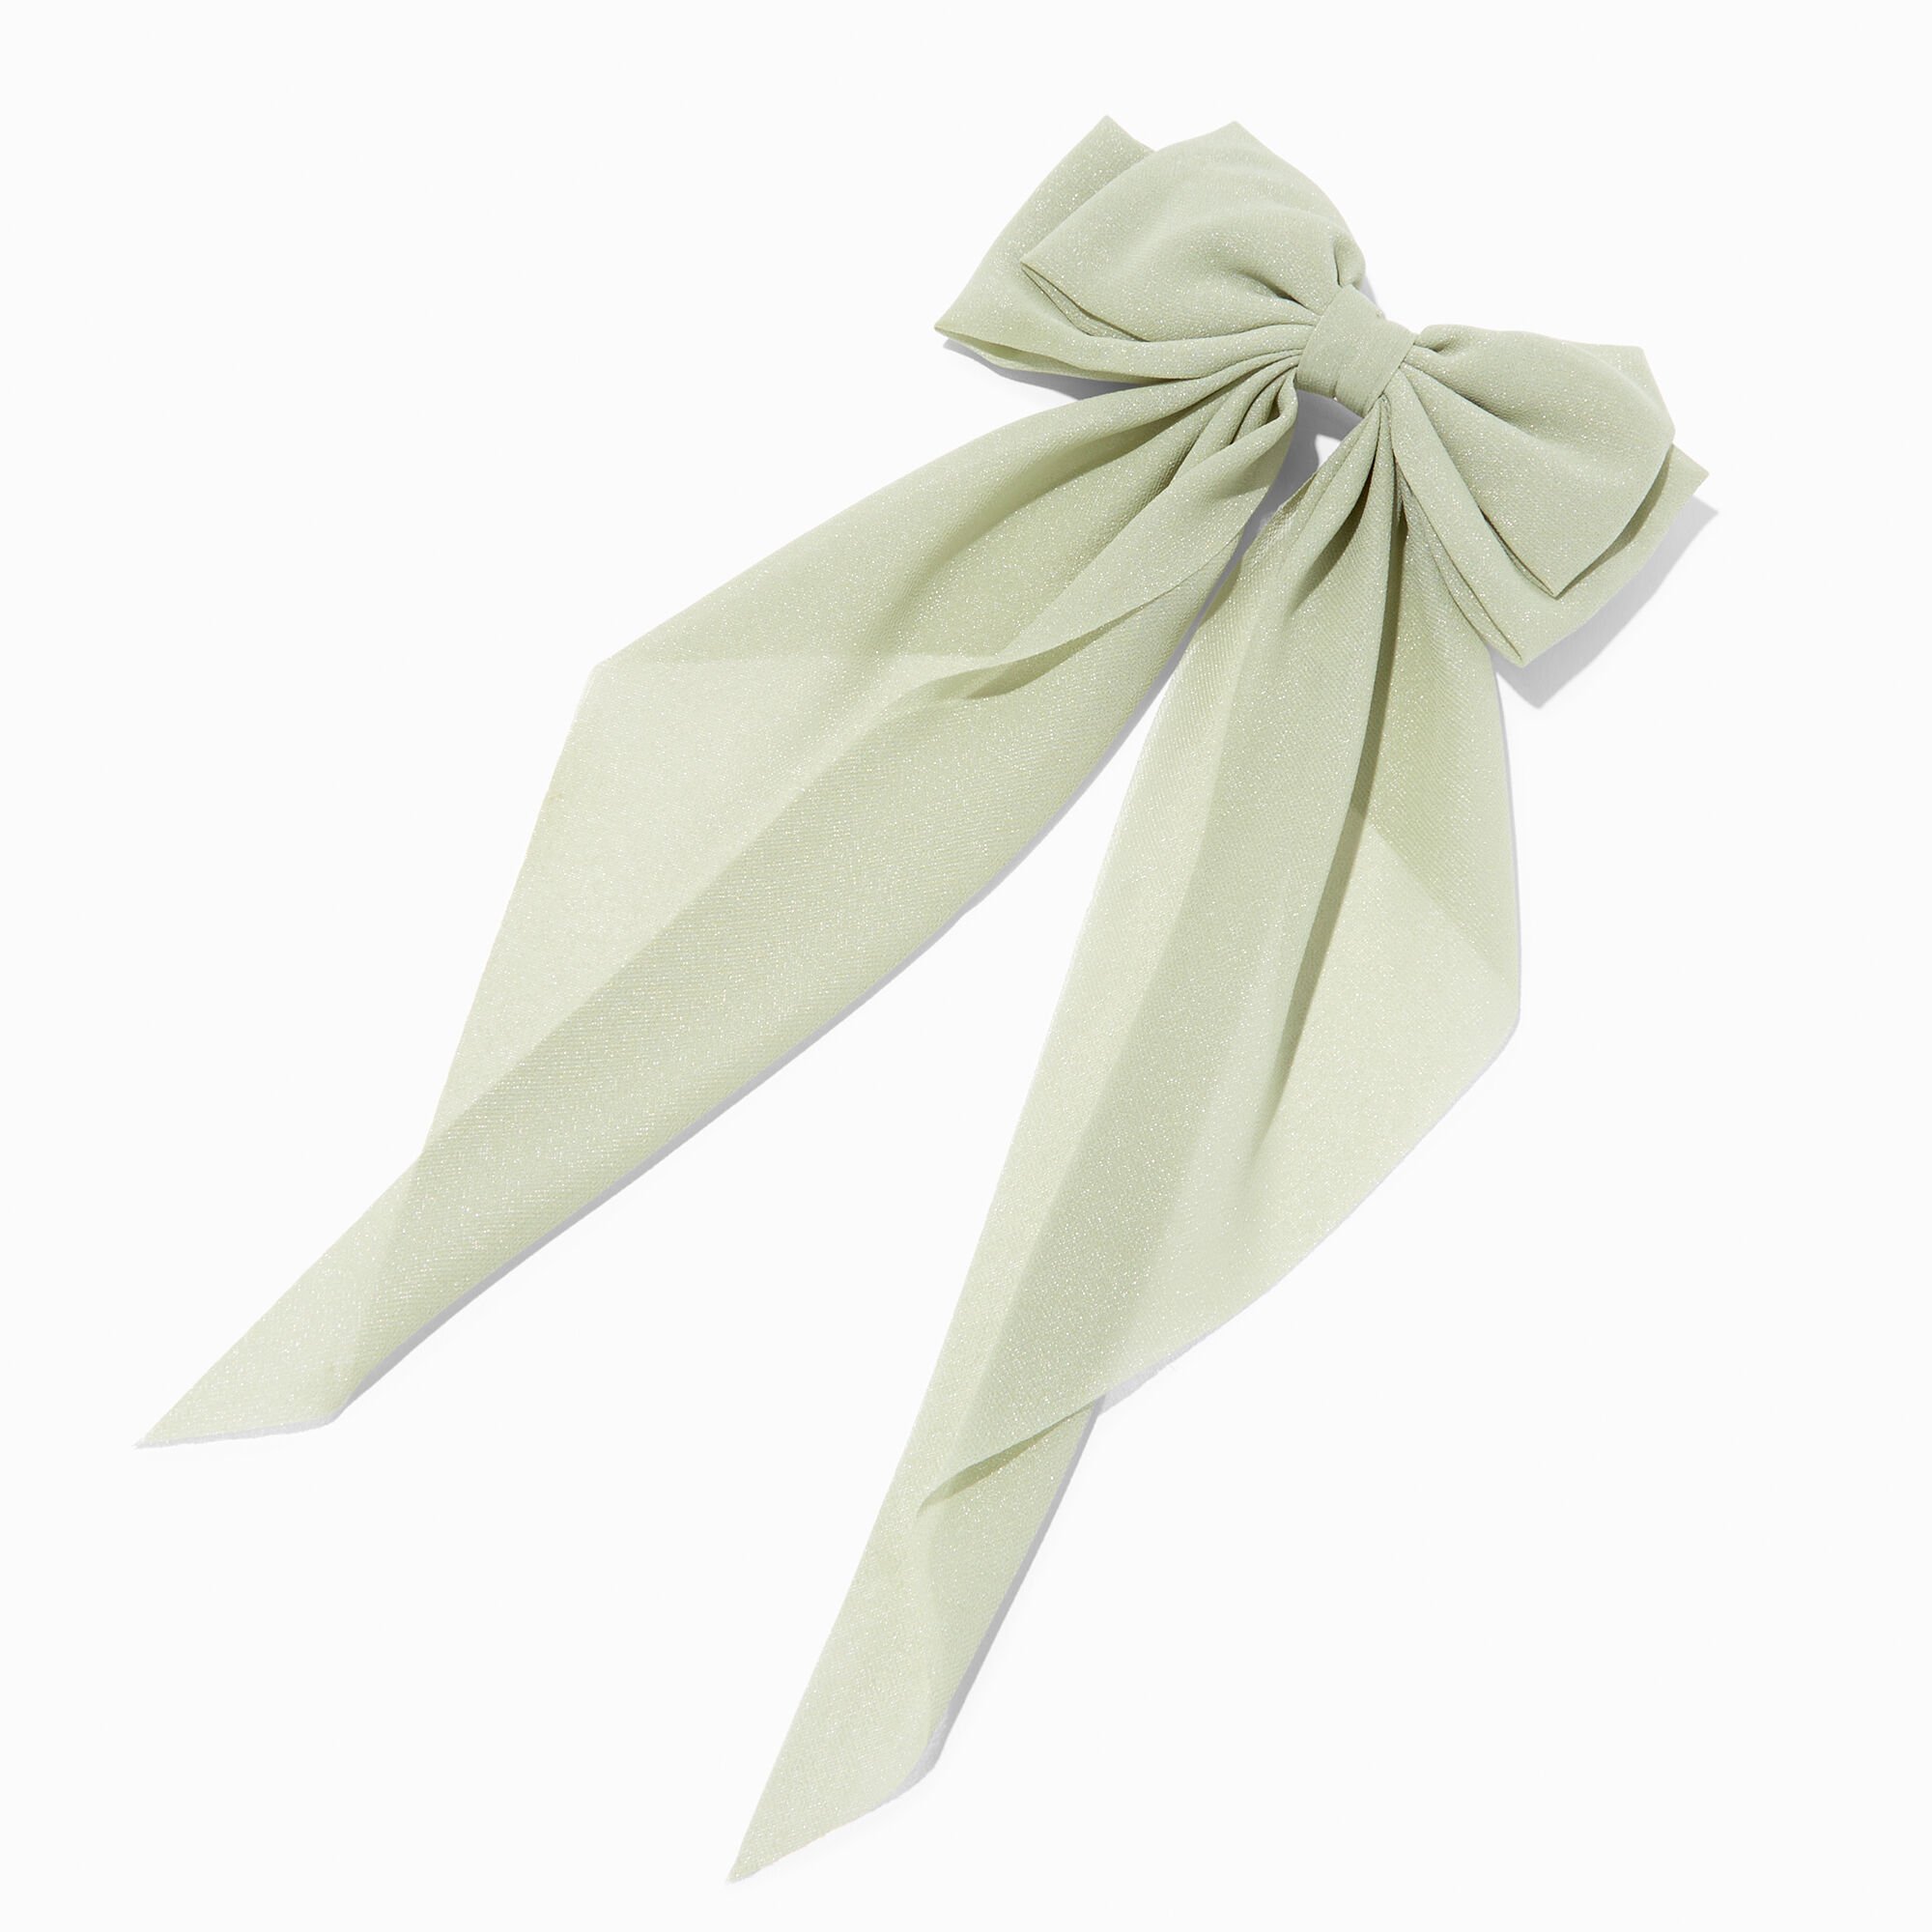 View Claires Sage Sheer Long Tail Bow Hair Clip Green information